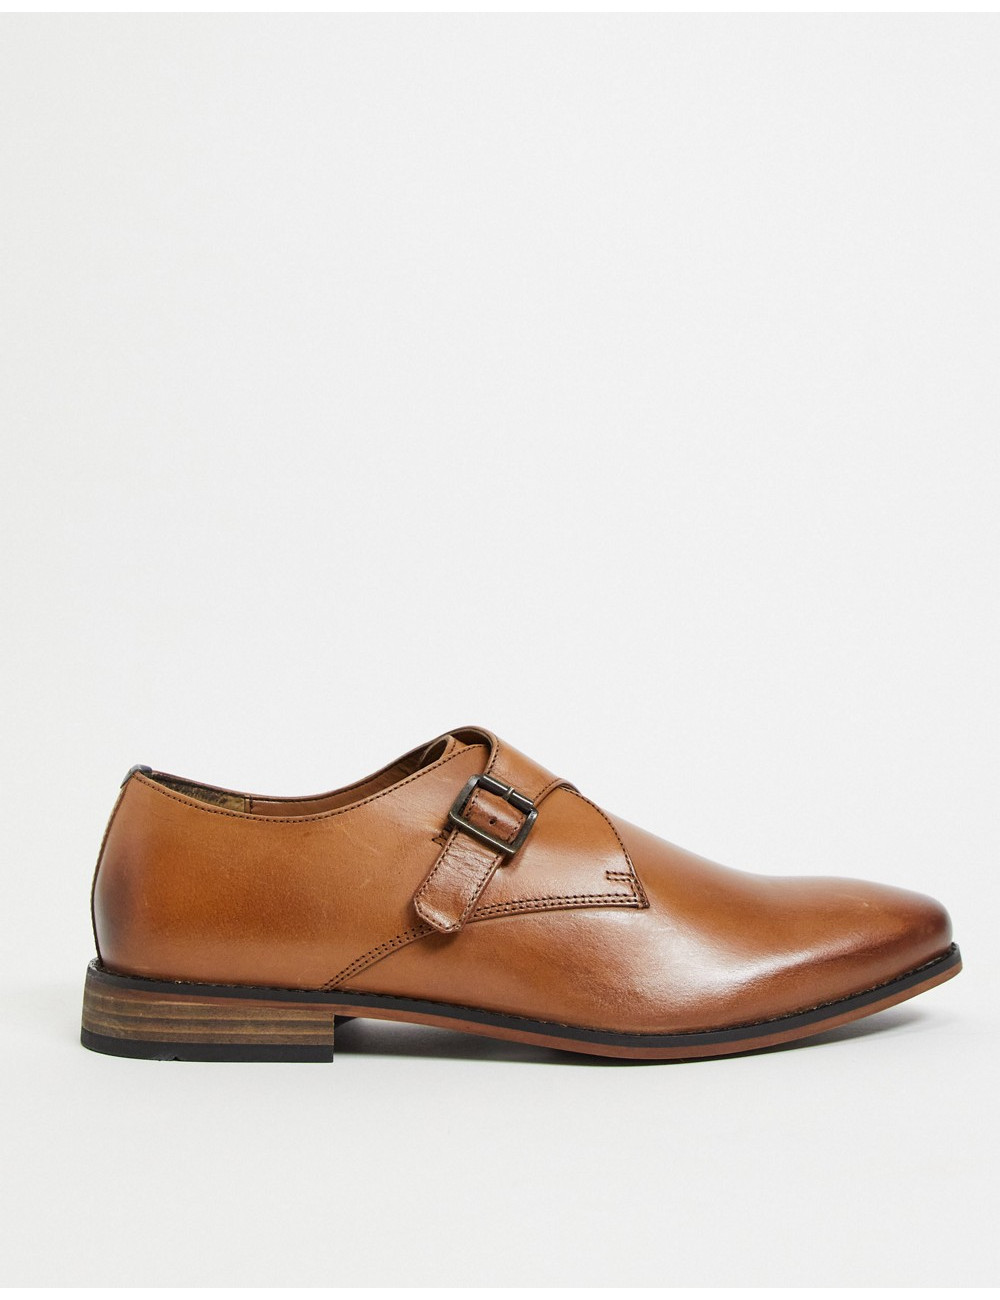 River Island brogues with...